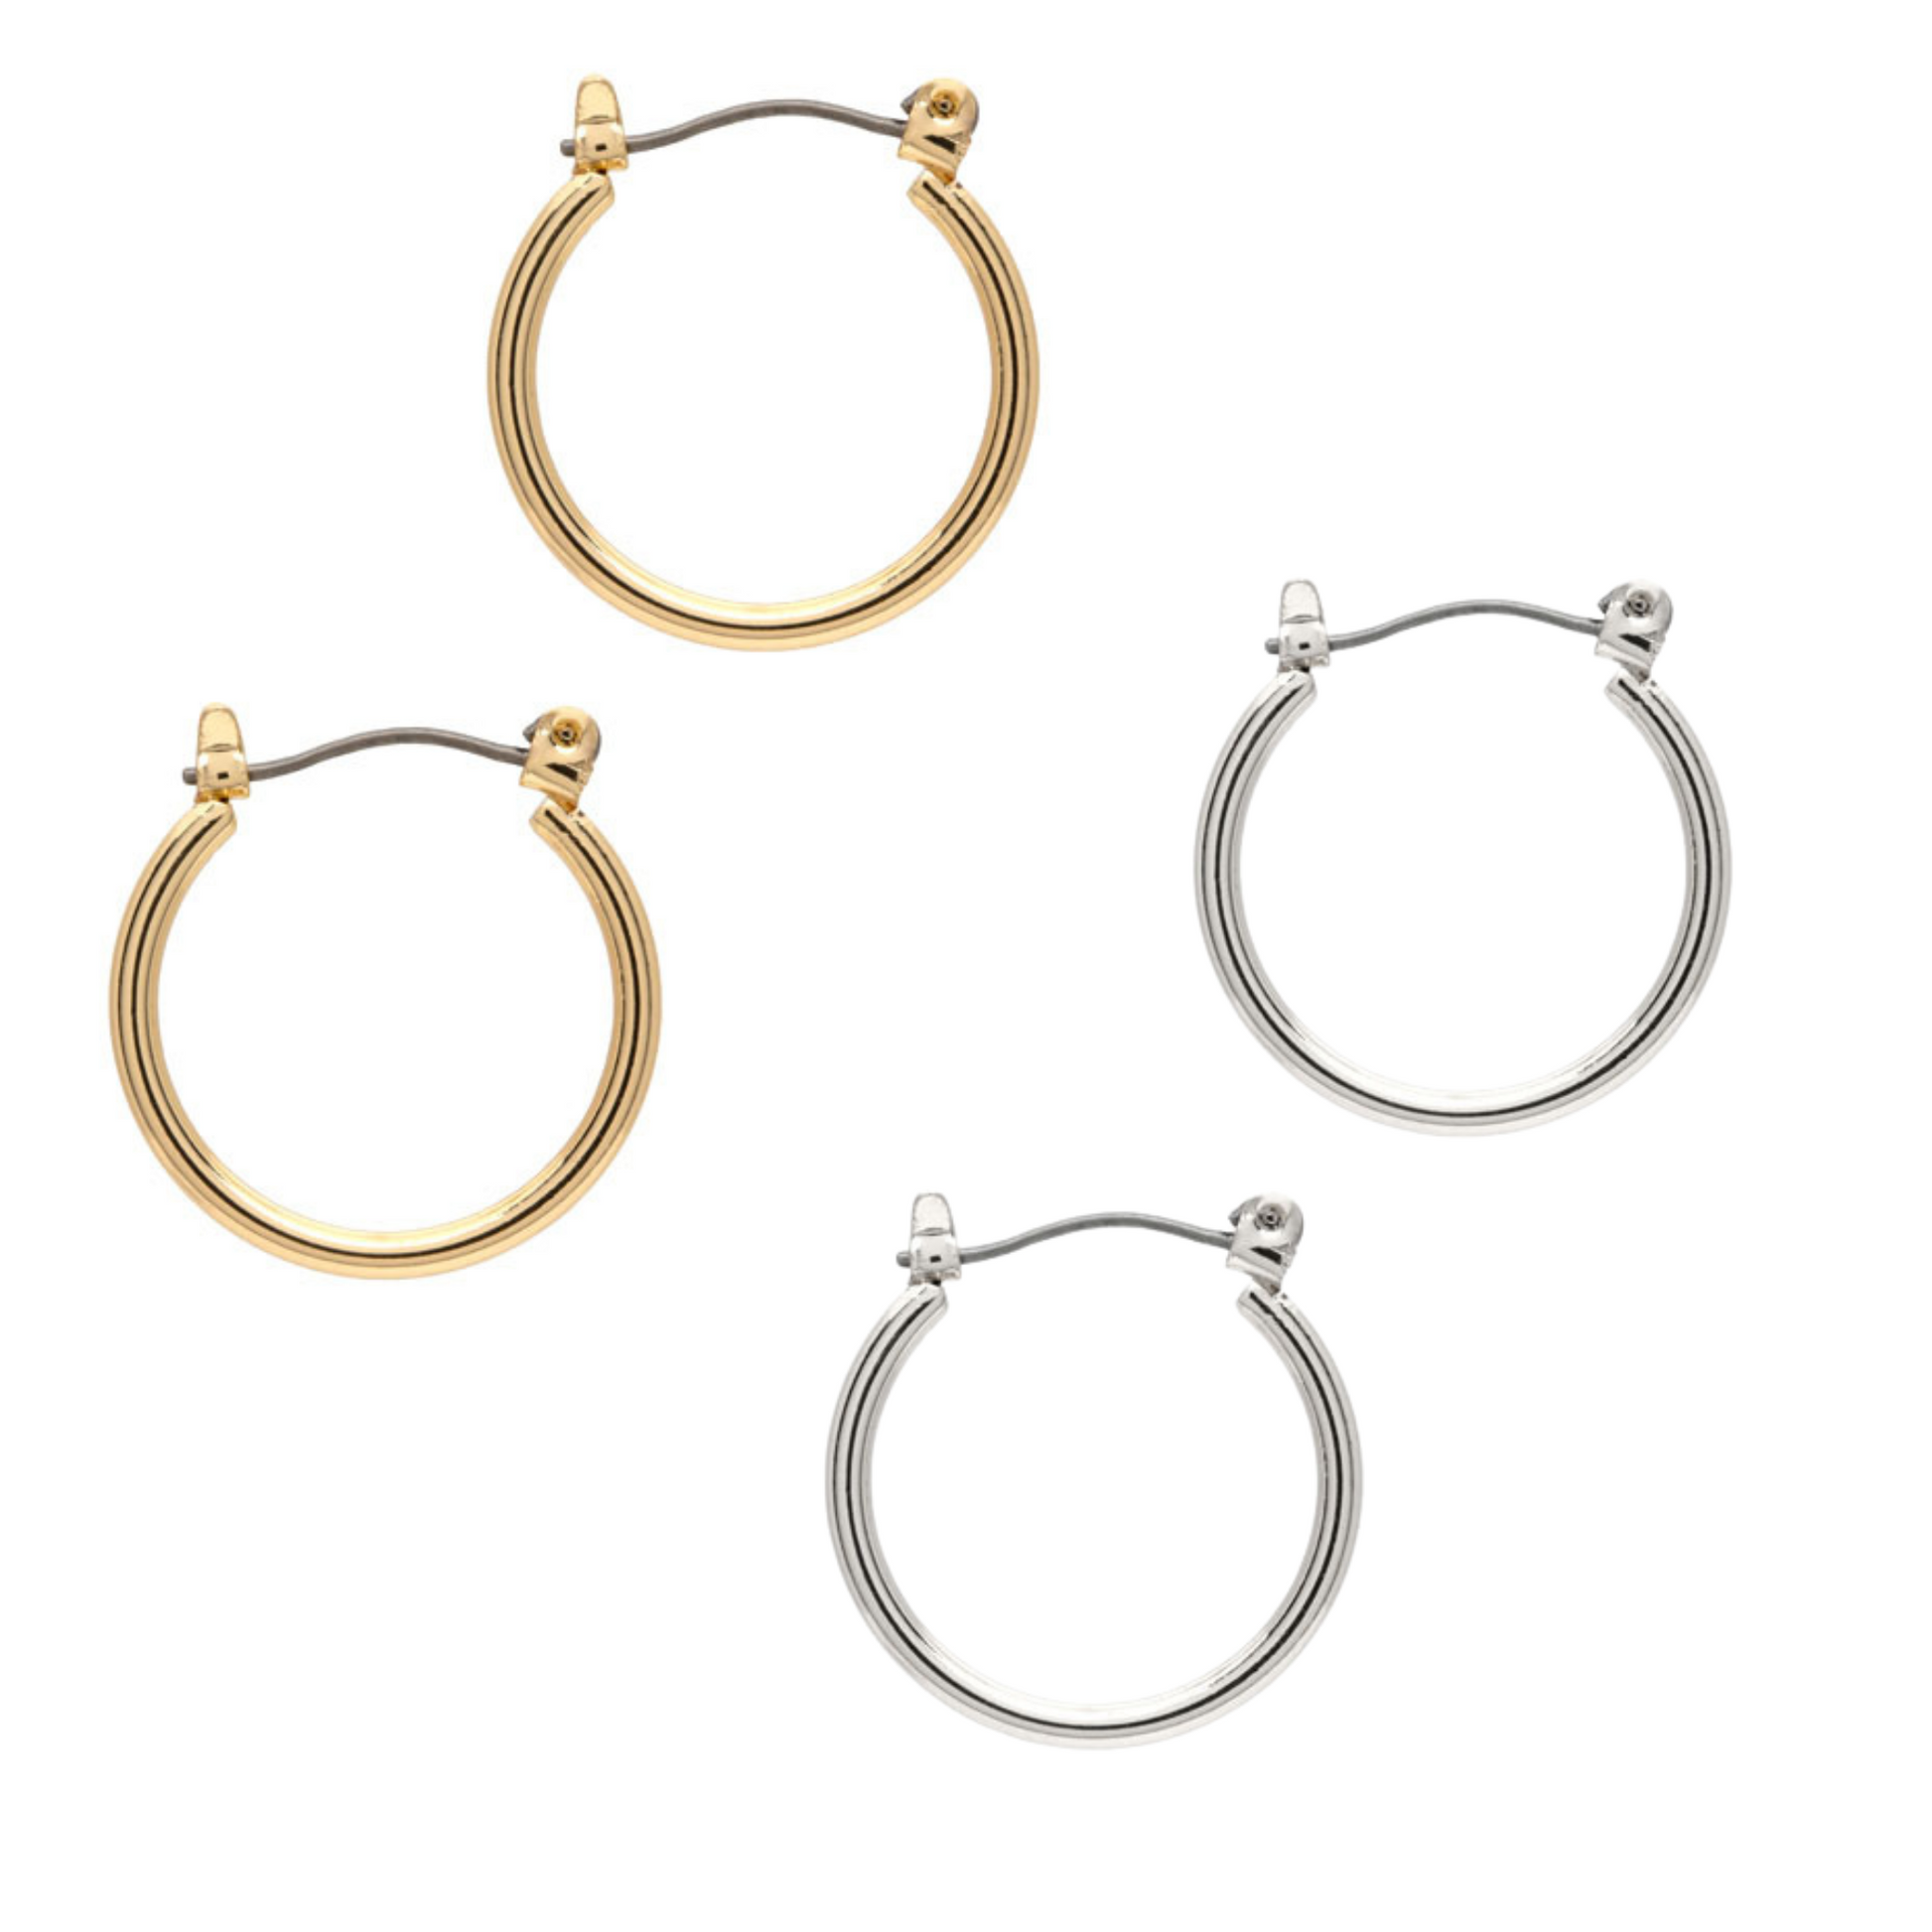 simple medium size hoop earrings. Available in silver and gold